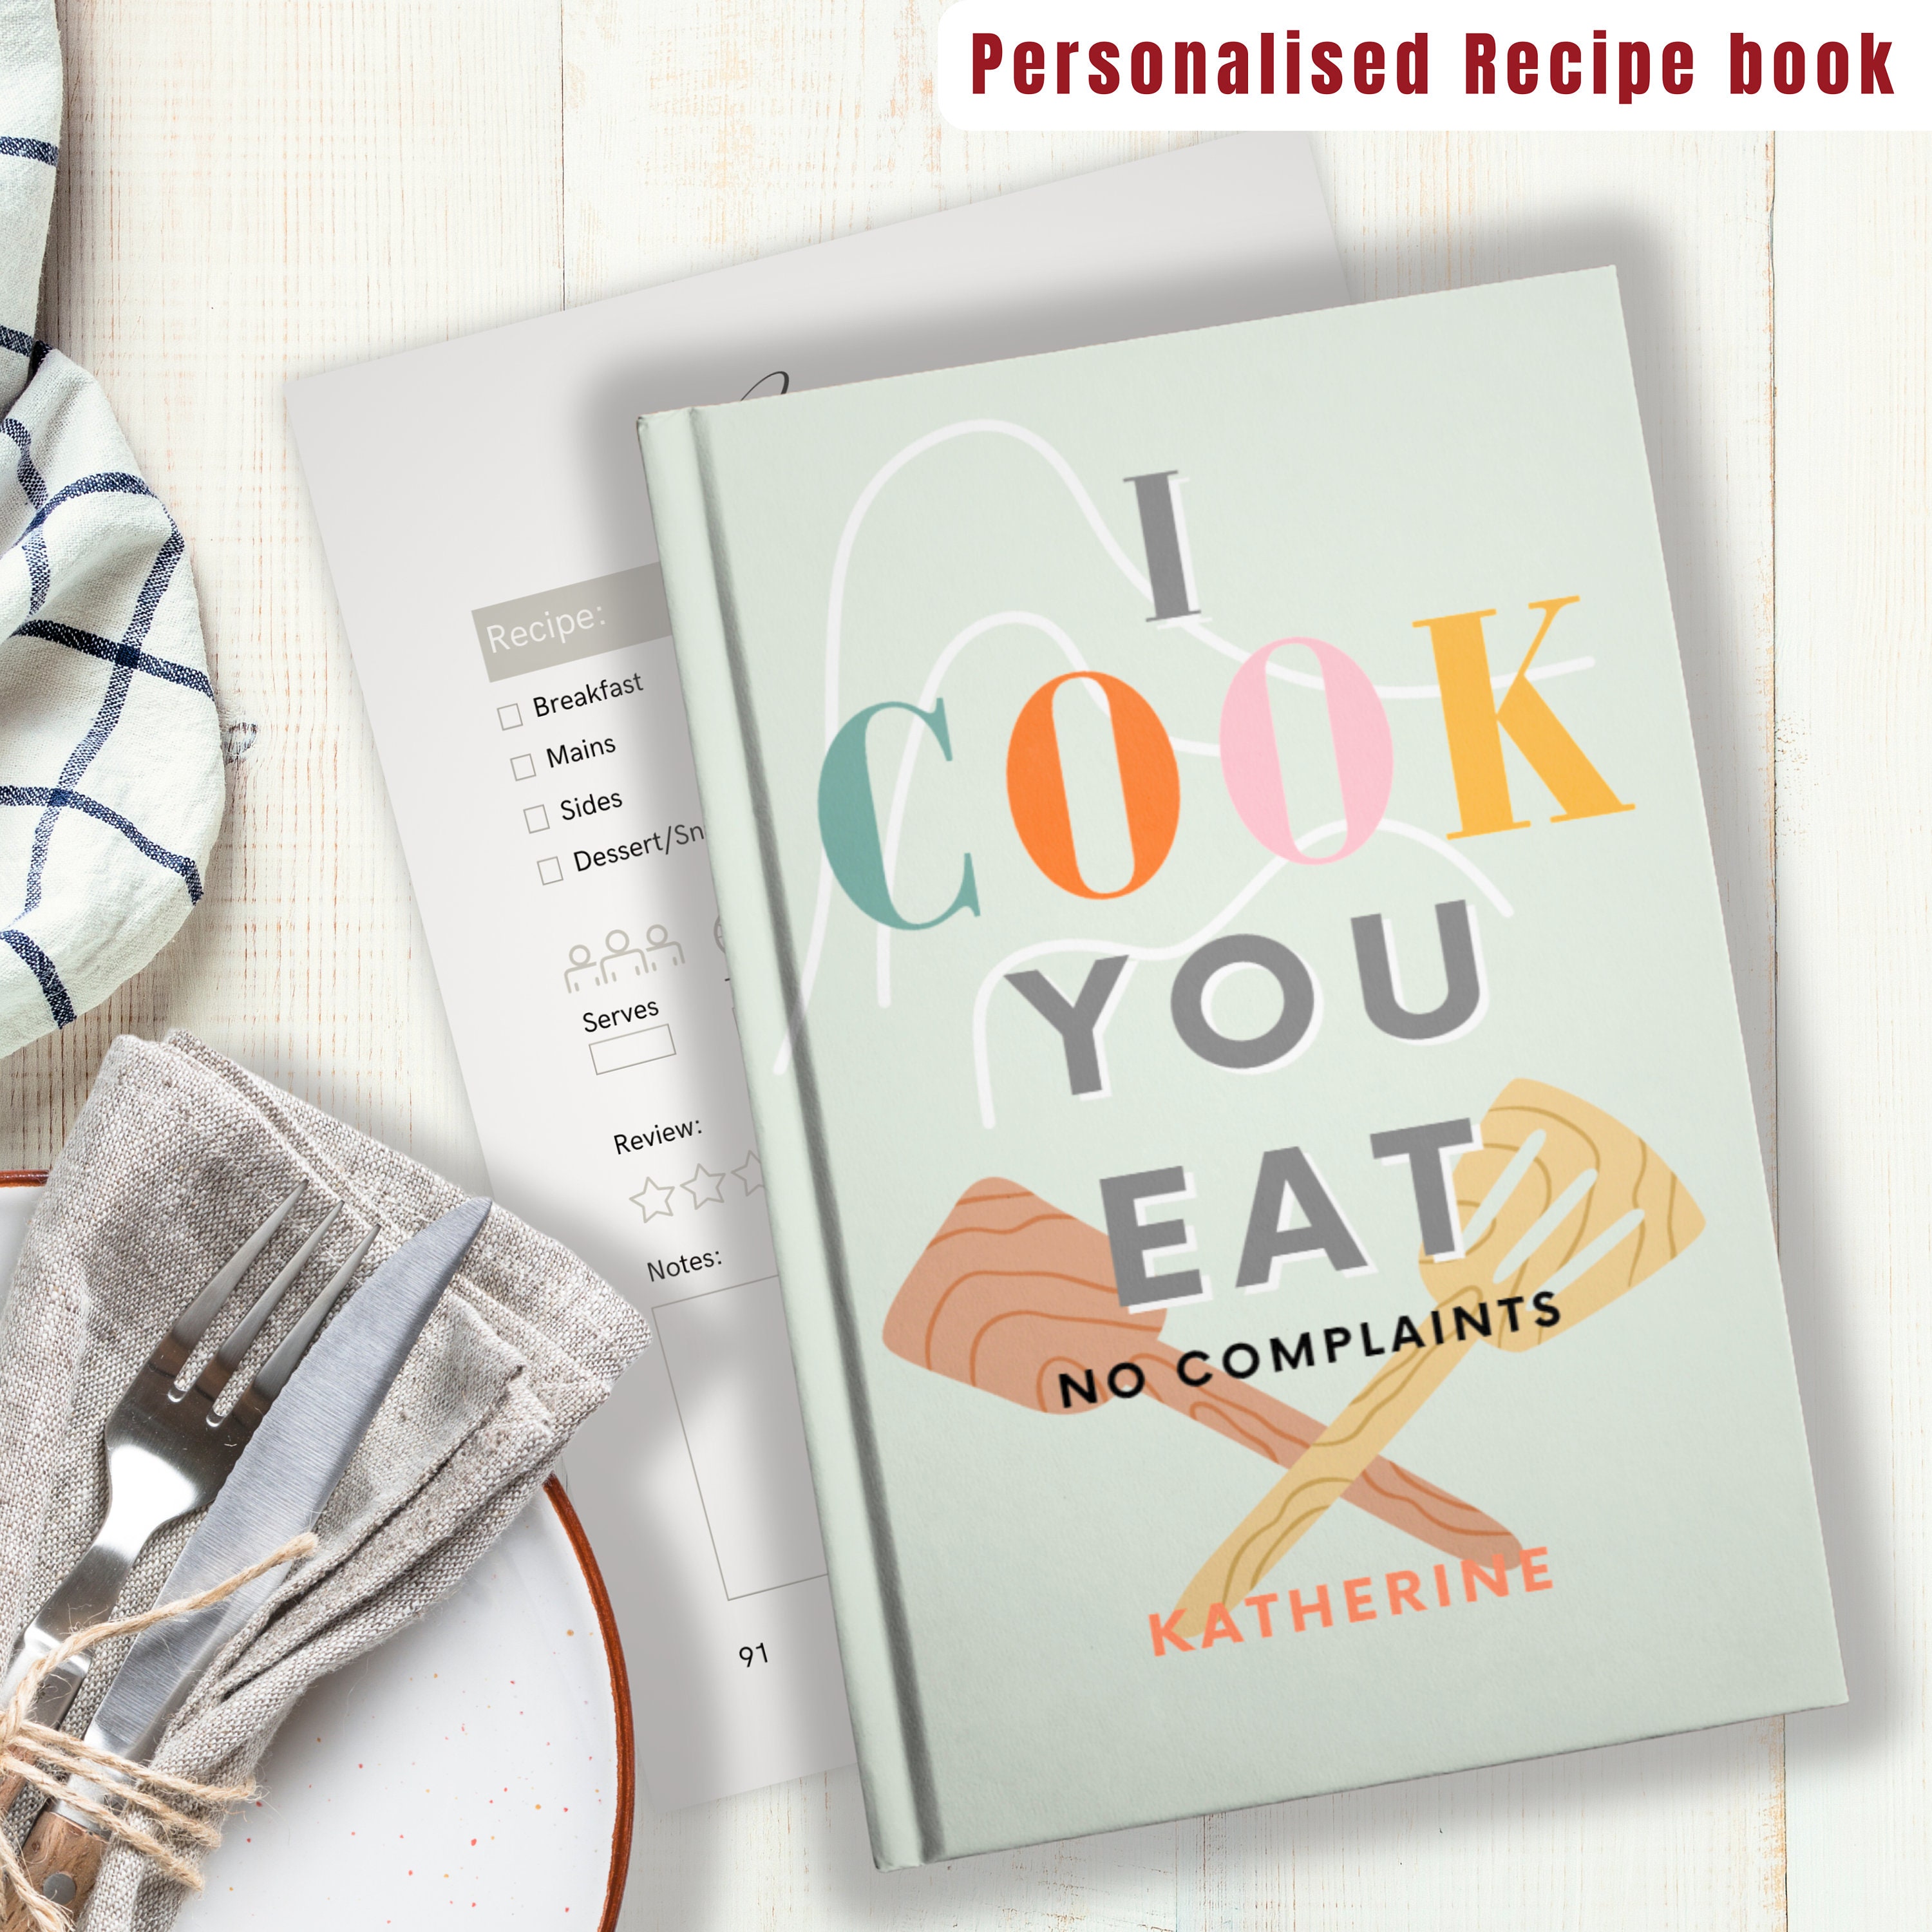 Personalized recipe book with measurement page. Write your own 228 recipes!  Custom gift for birthday, gift for mom and dad. Hard-soft covers